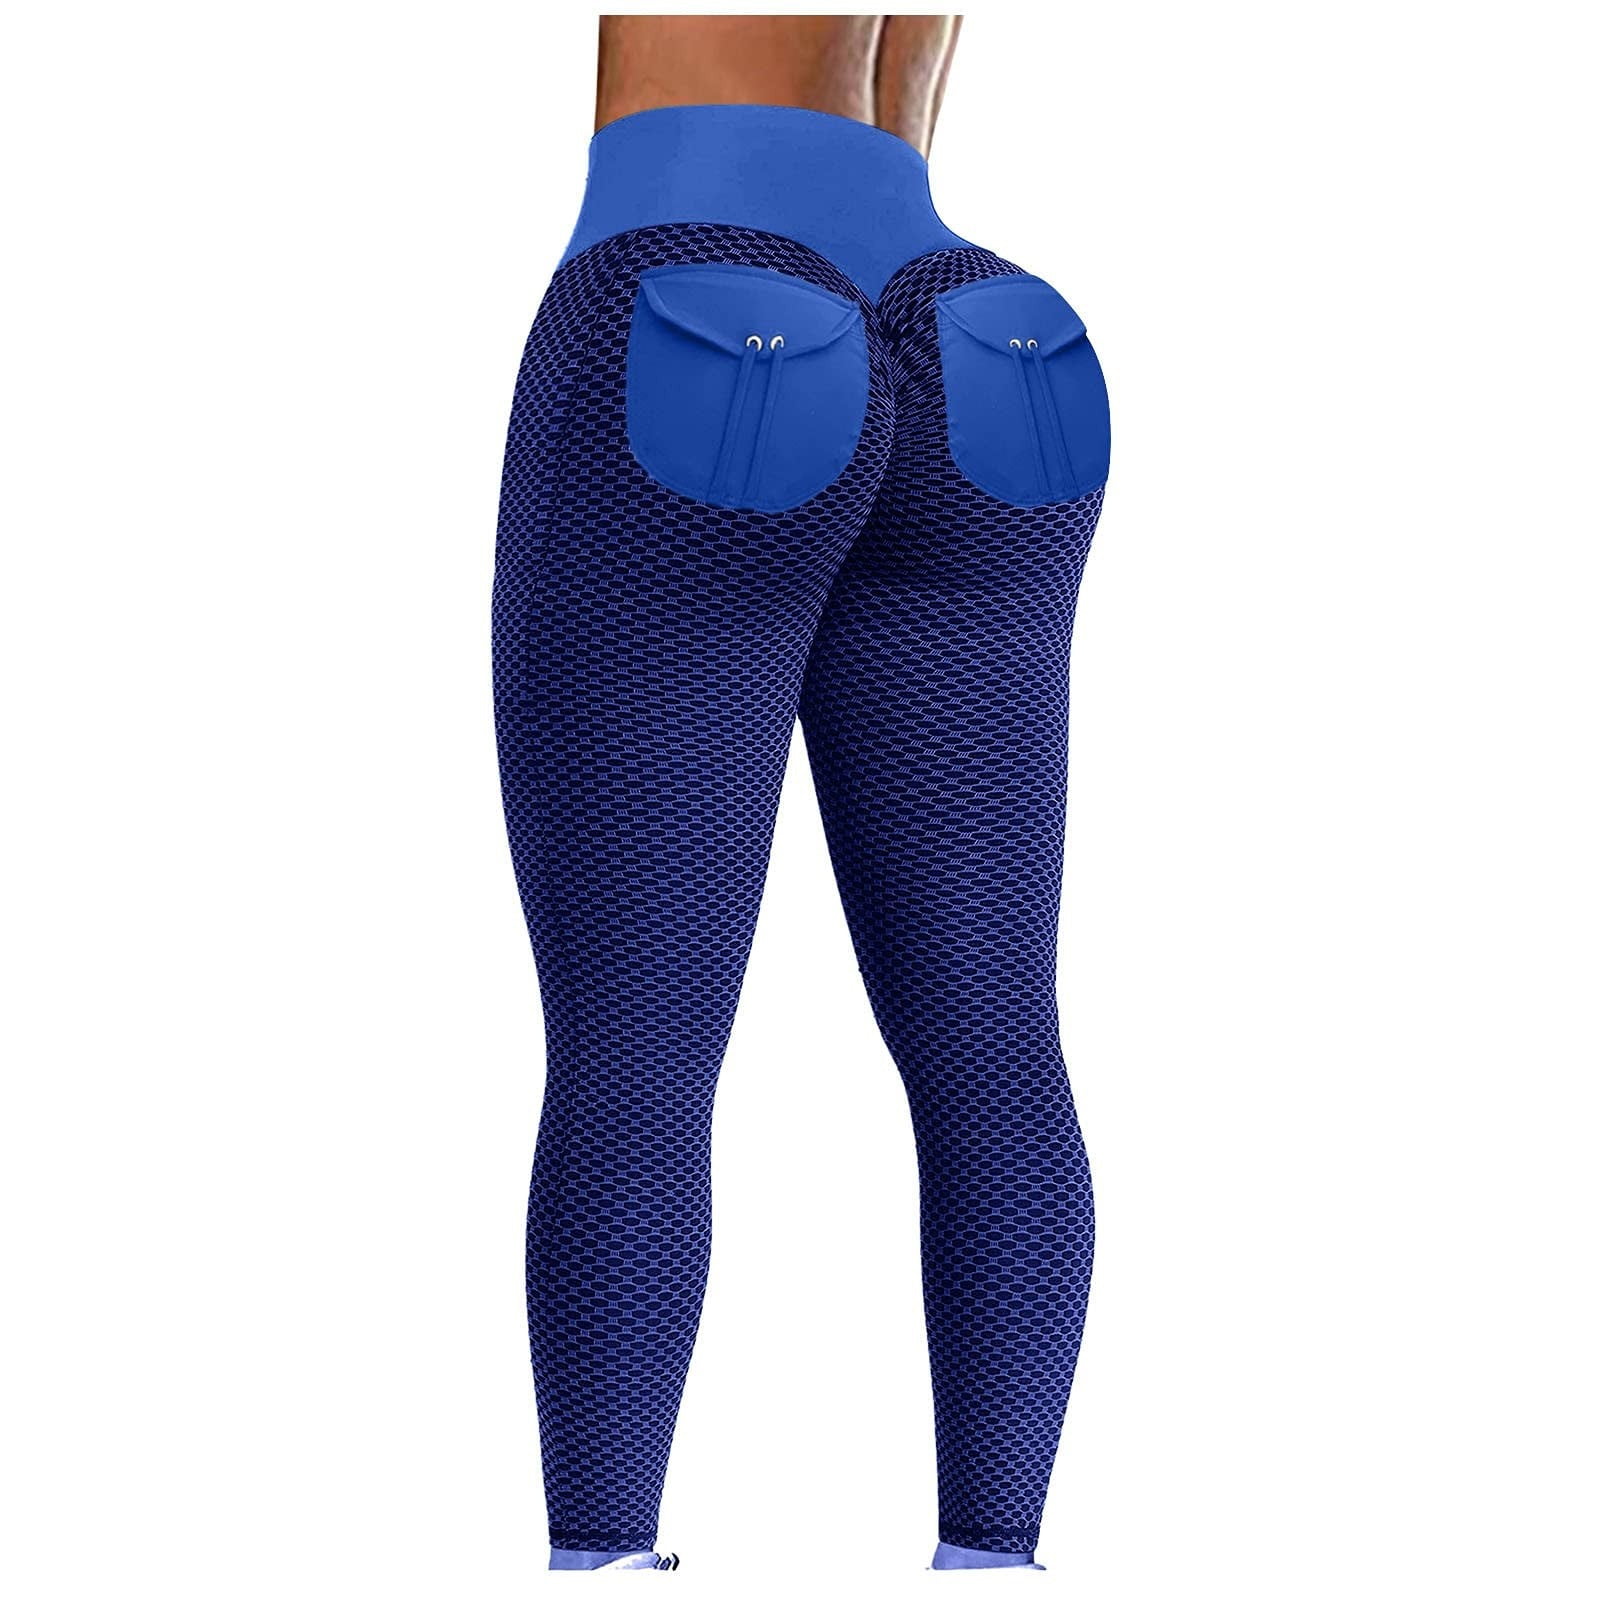 RQYYD Clearance Leggings for Women Butt Lifting Leggings Workout Scrunch  Seamless Leggings High Waisted Booty Yoga Pants(Blue,M)